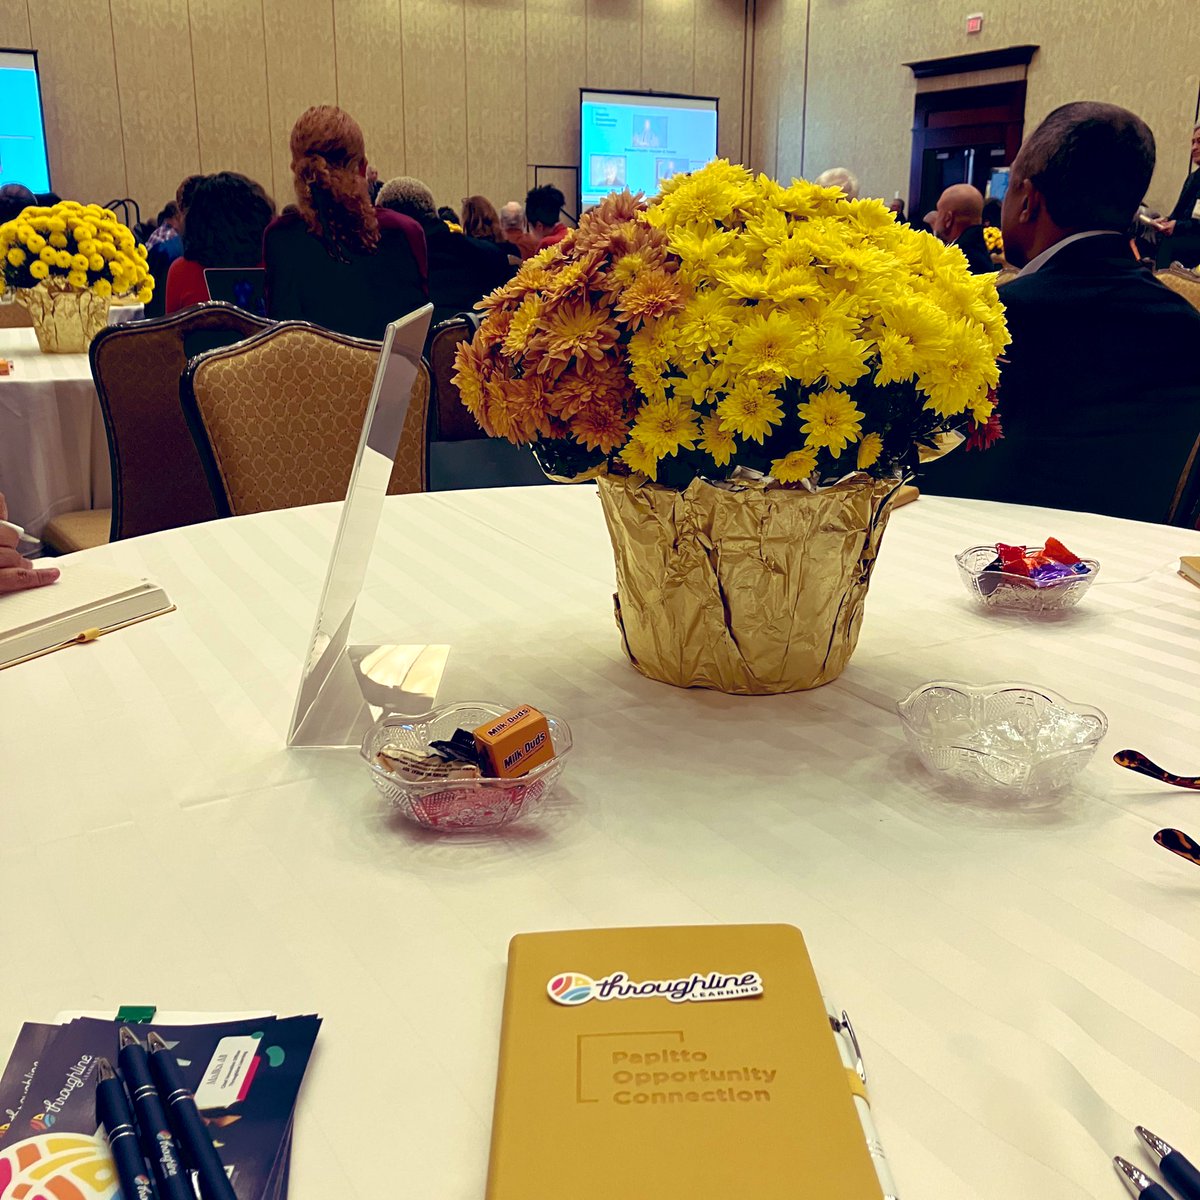 Excited to represent @ThroughlineLrng today at the @POCFoundationRI Connector Conference alongside @csanford42! Thank you for having us #edchatri